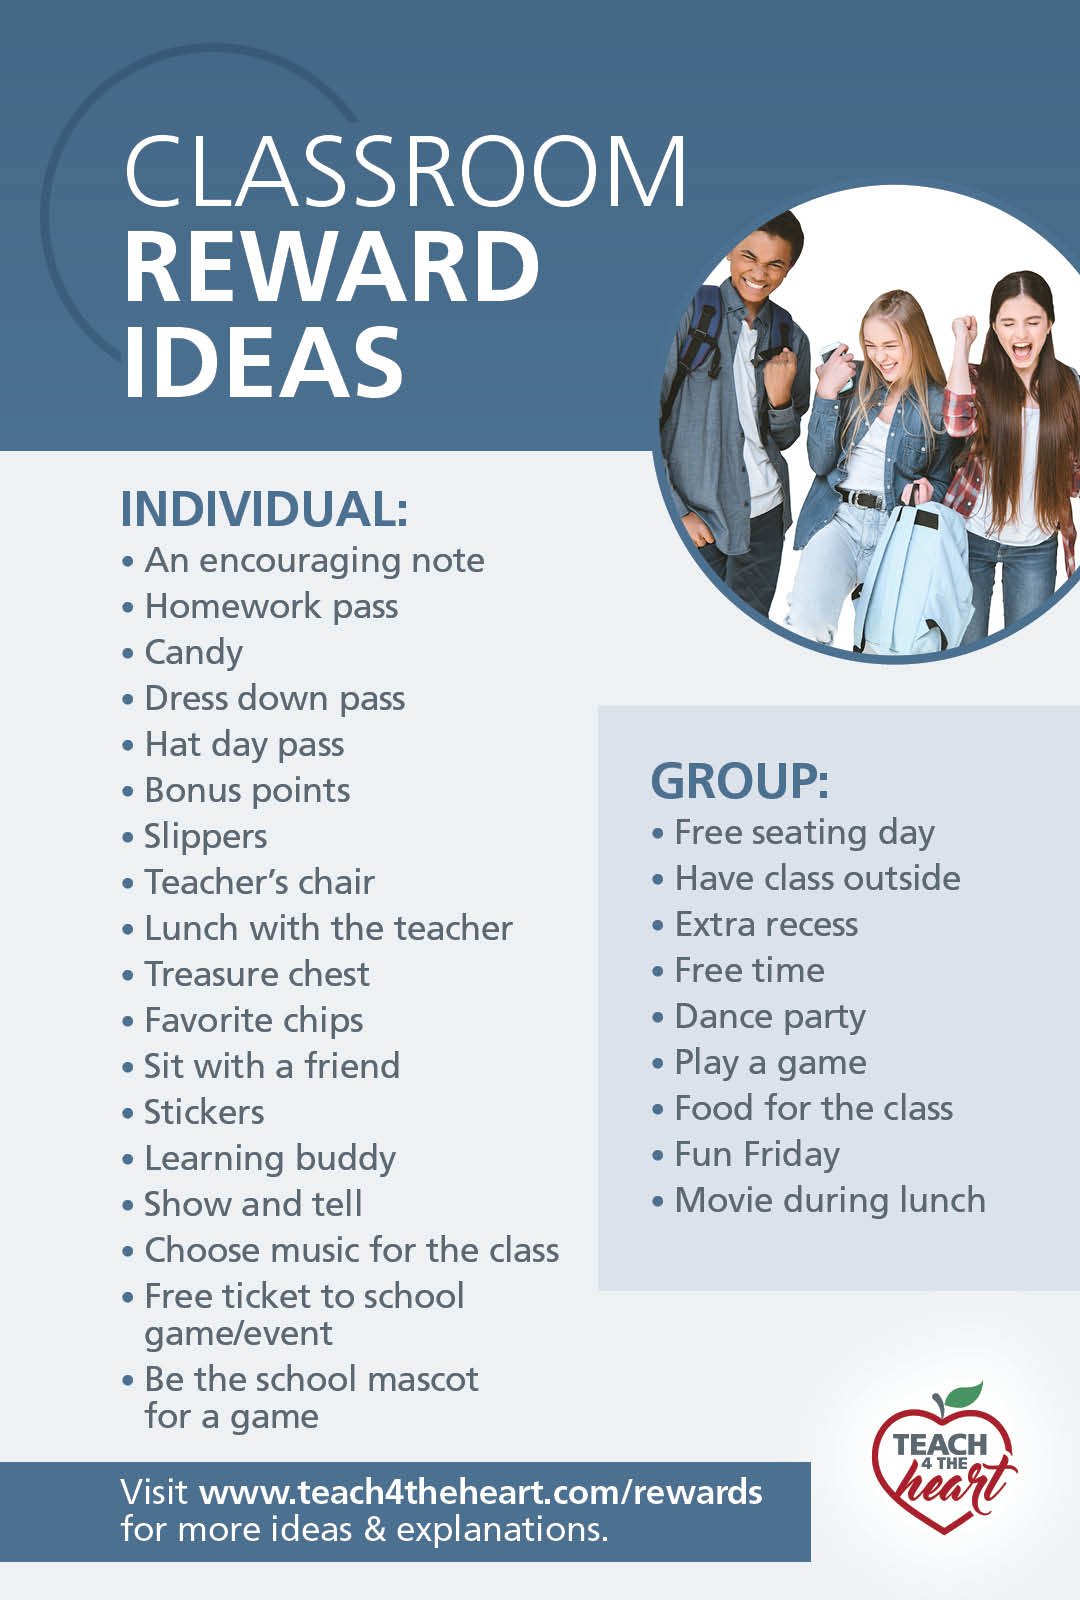 In this post, you'll get over 60 classroom reward ideas. You can use these ideas in elementary, middle school, or high school. All of these rewards are easy and many are free. These reward ideas are great to encourage positive behavior and a wonderful classroom environment. Get classroom reward ideas for students at www.teach4theheart.com.